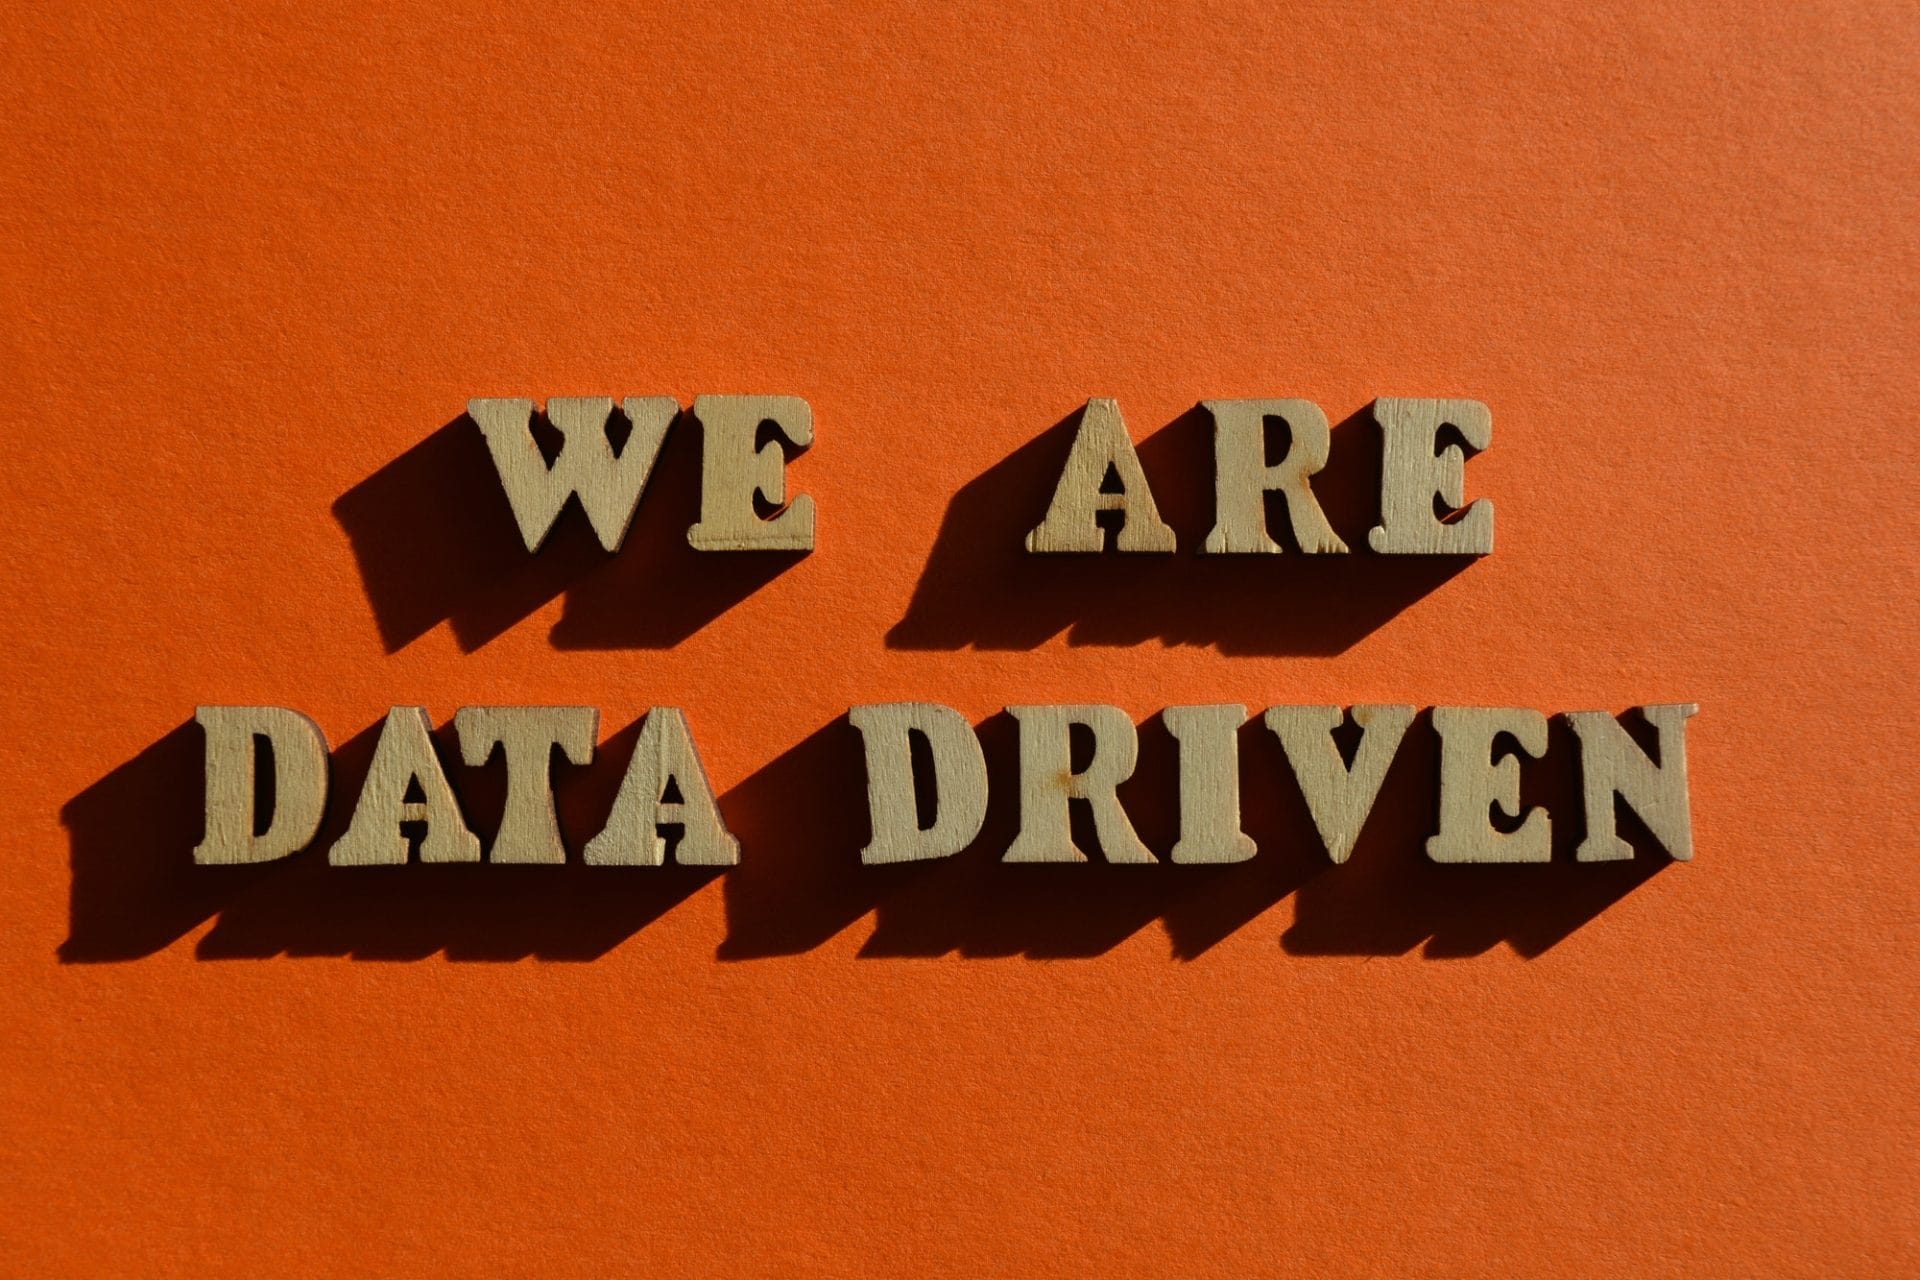 We Are Data Driven, phrase as banner headline